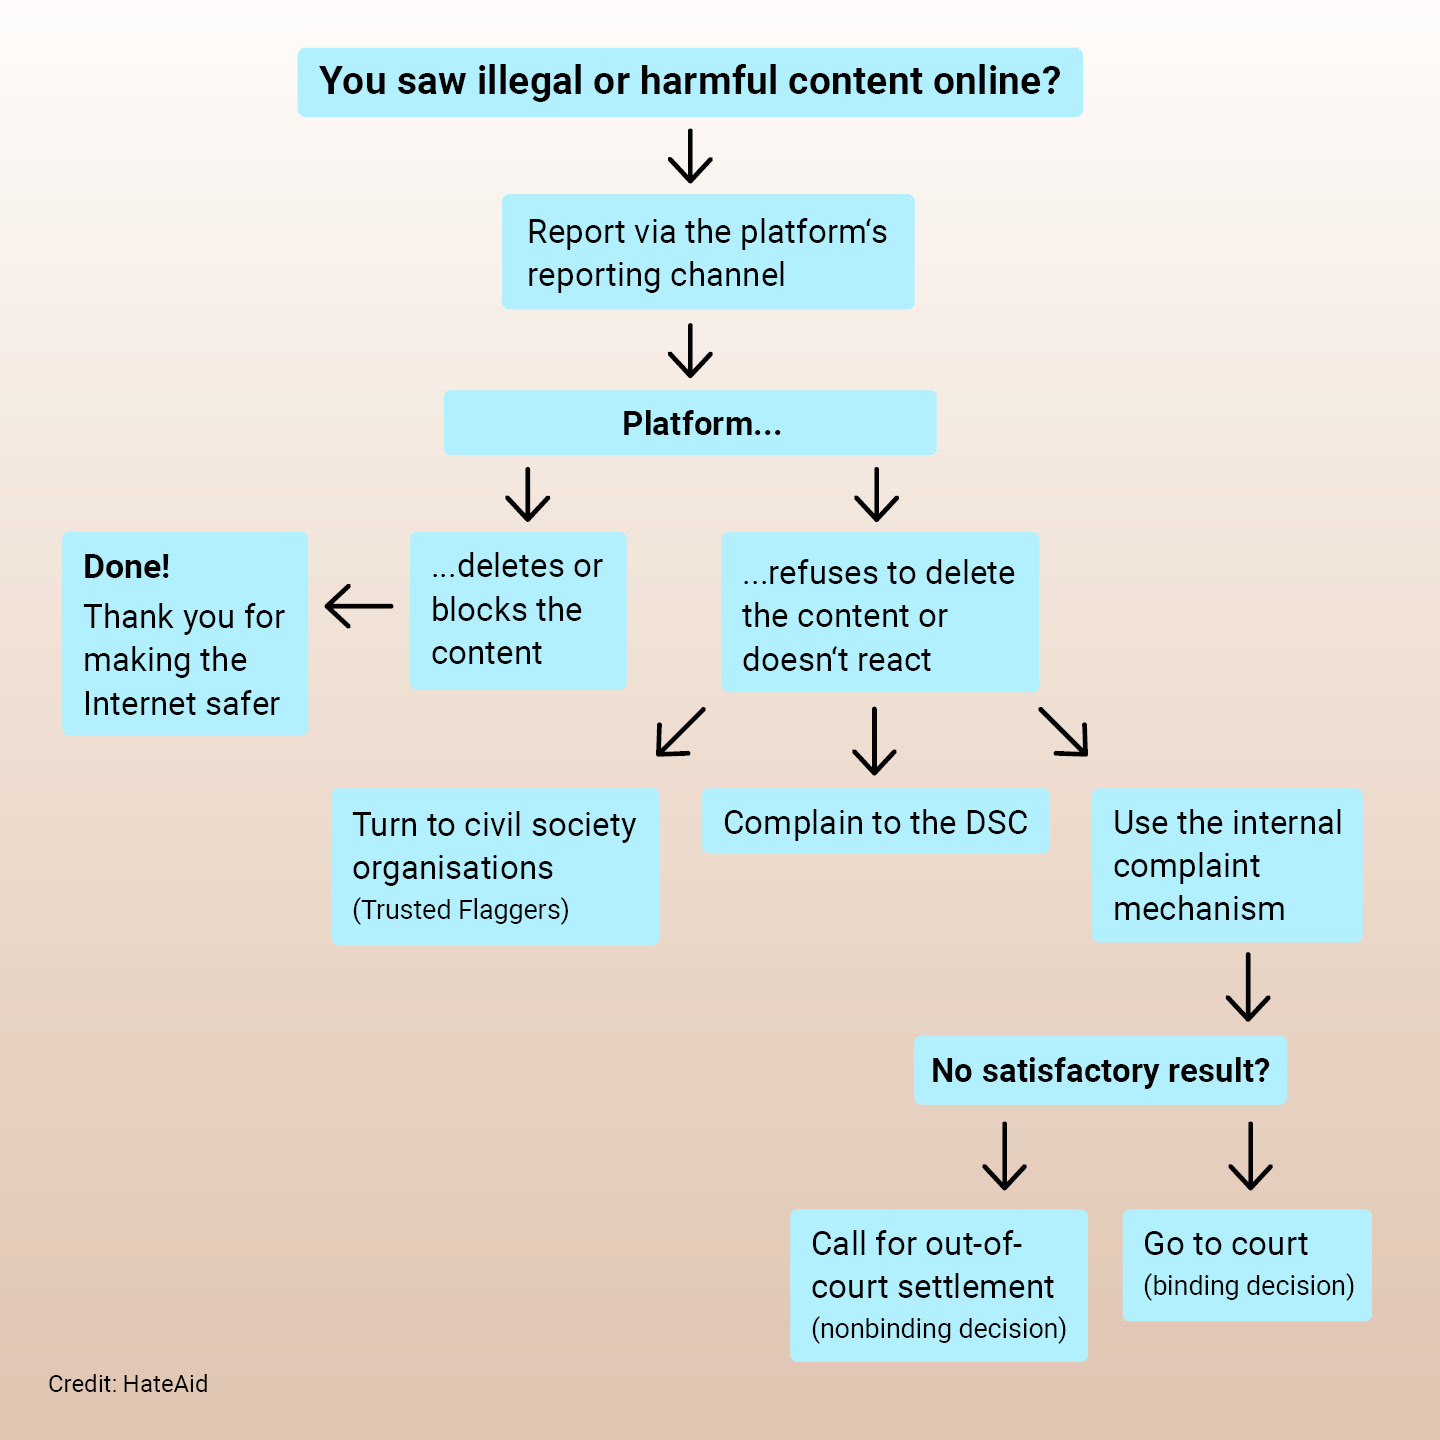 Flowchart, with process of reporting content on social media platforms.